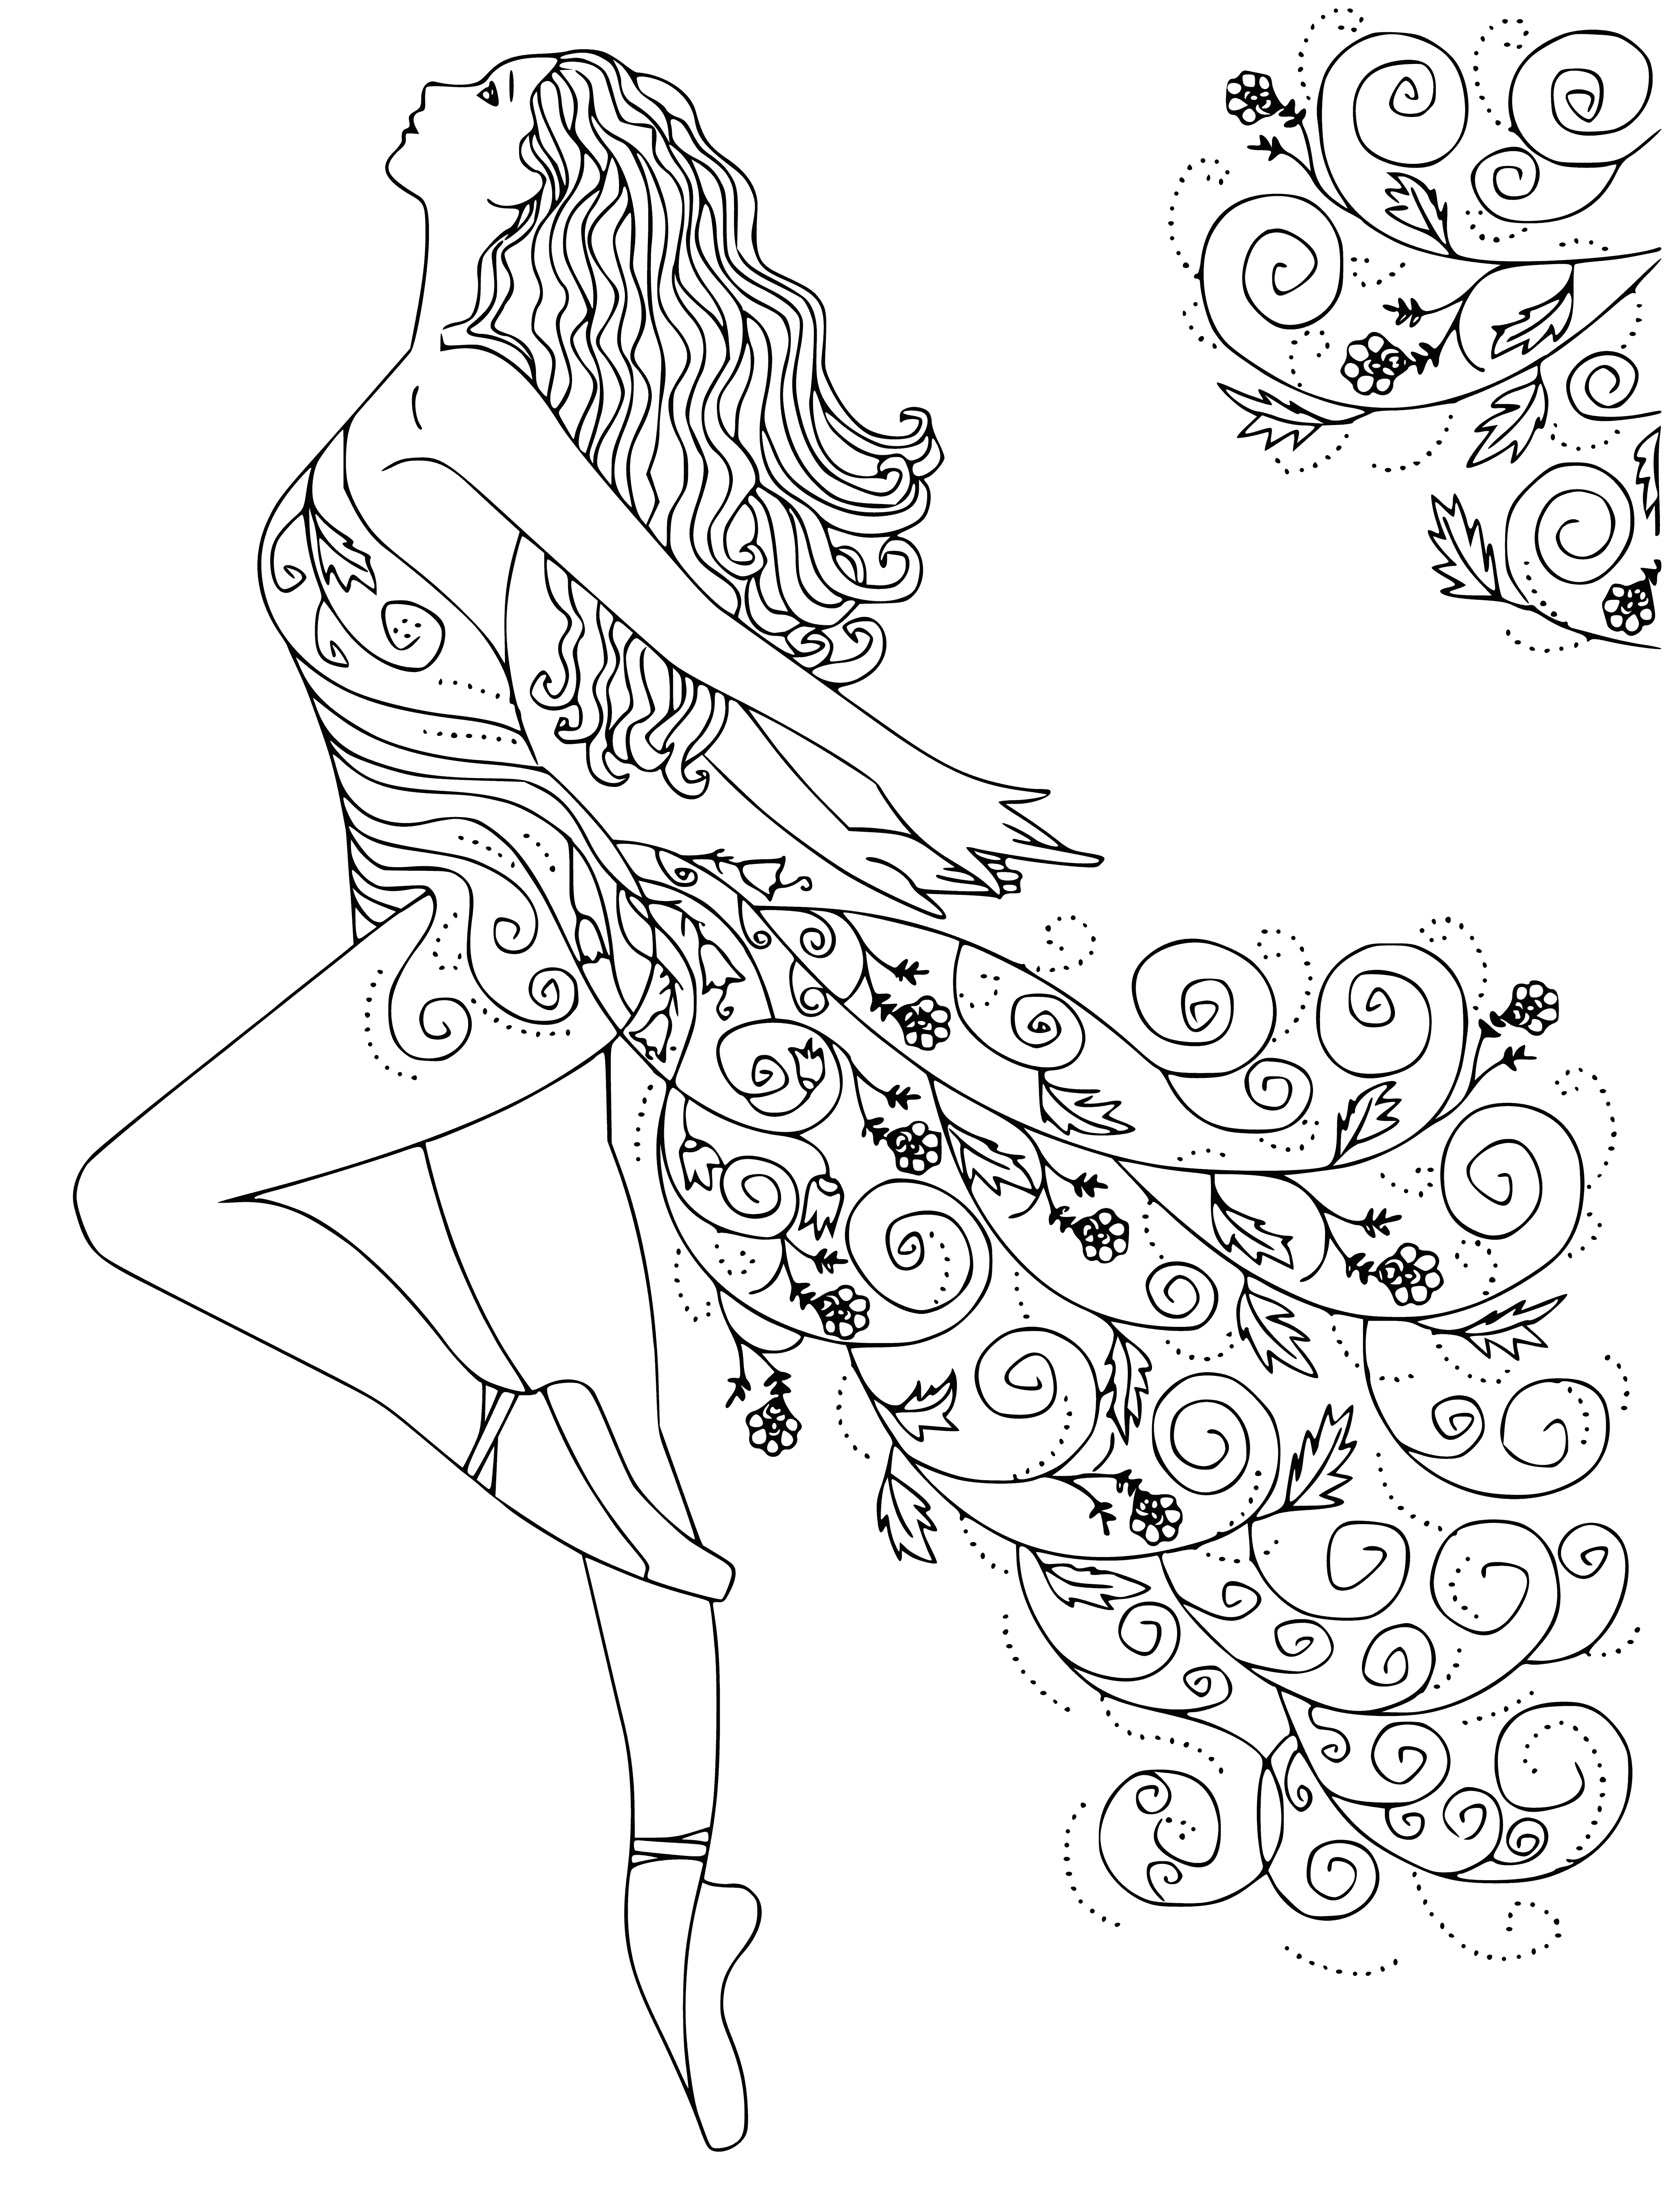 Ballerina coloring page